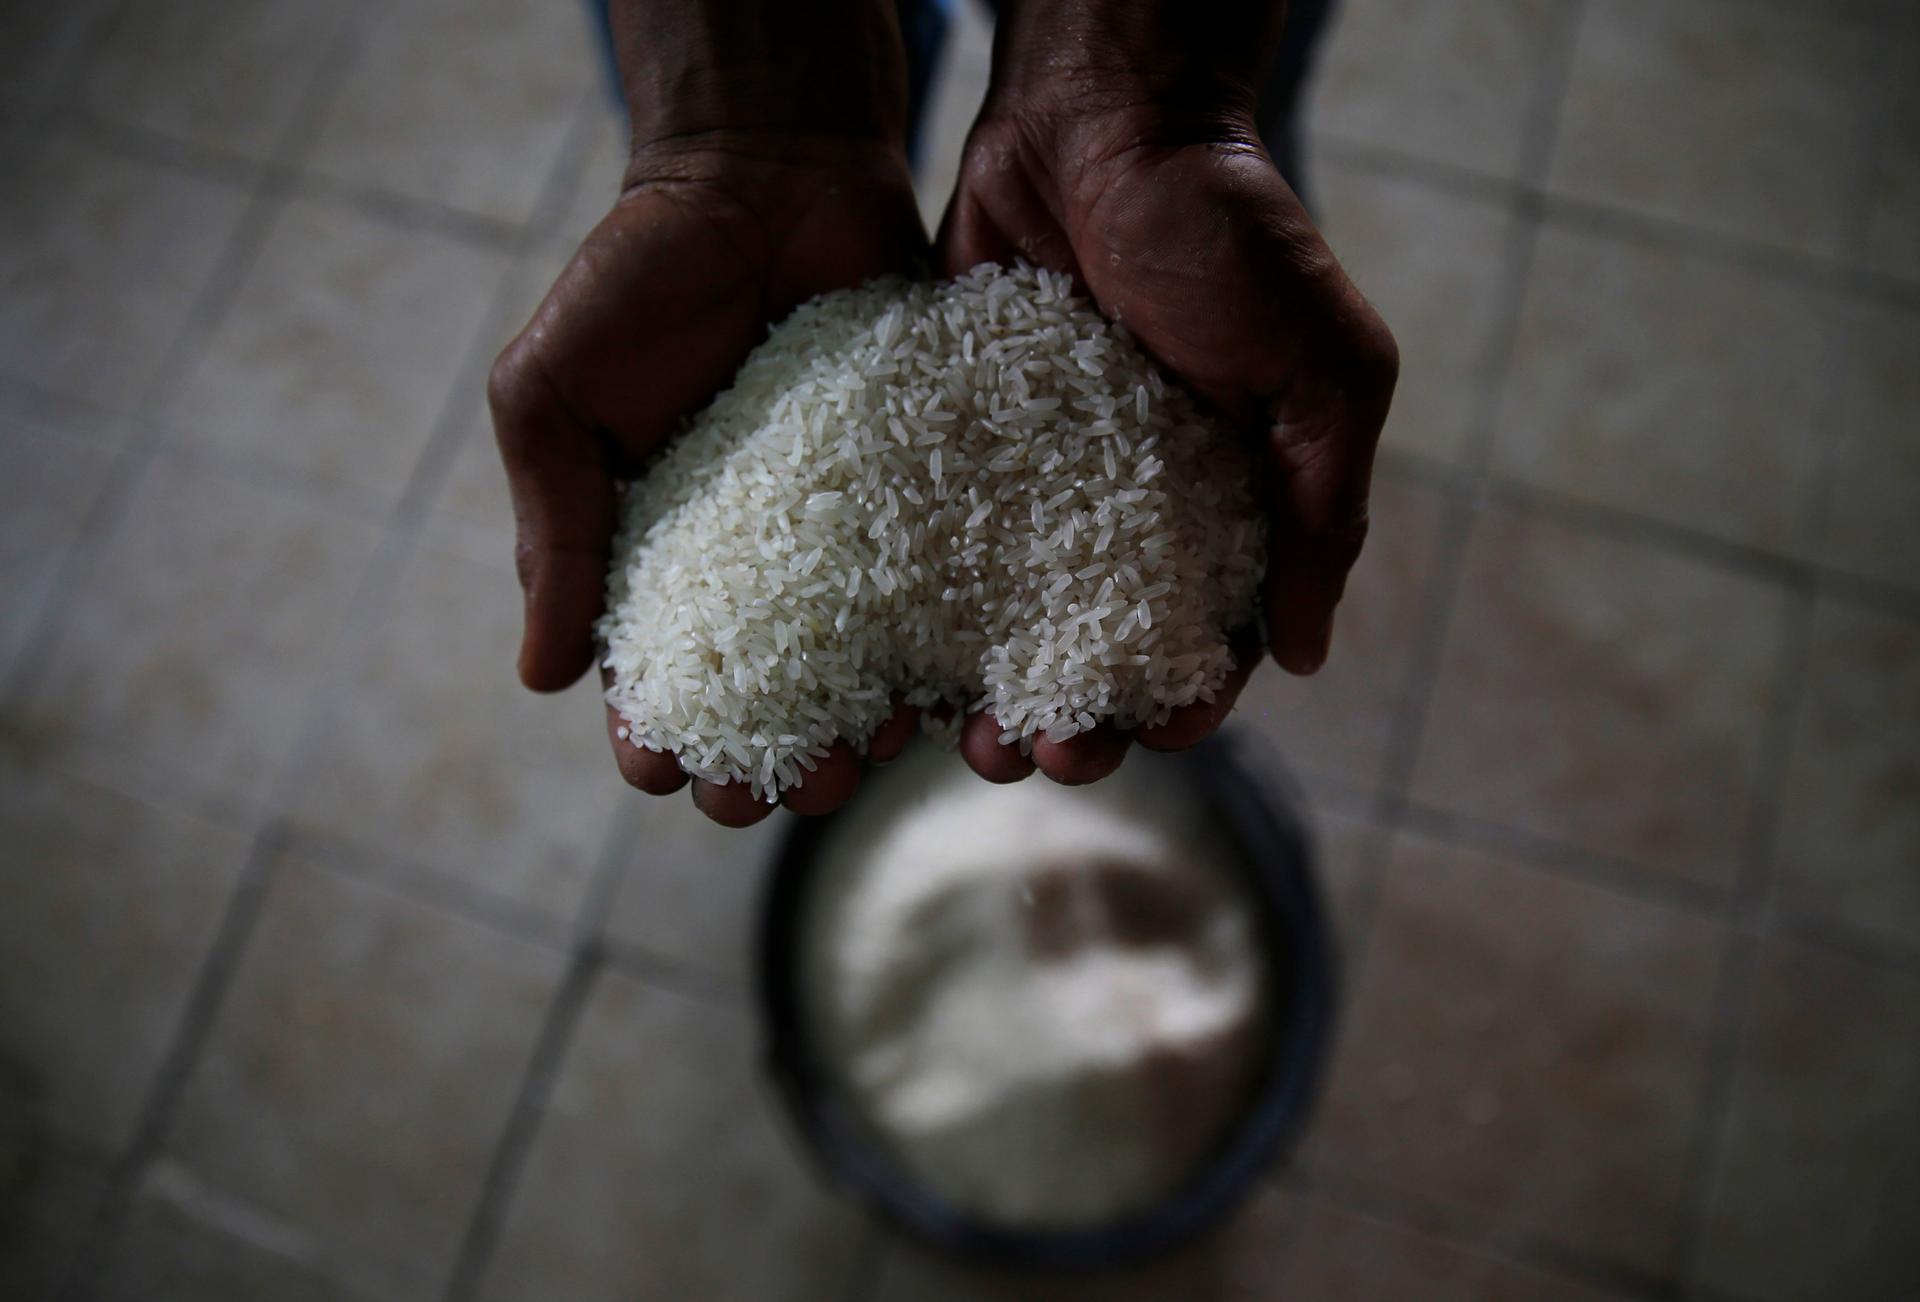 A worker holds rice at a rice mill during harvest time in Padalarang, Indonesia's West Java province, May 27, 2014.